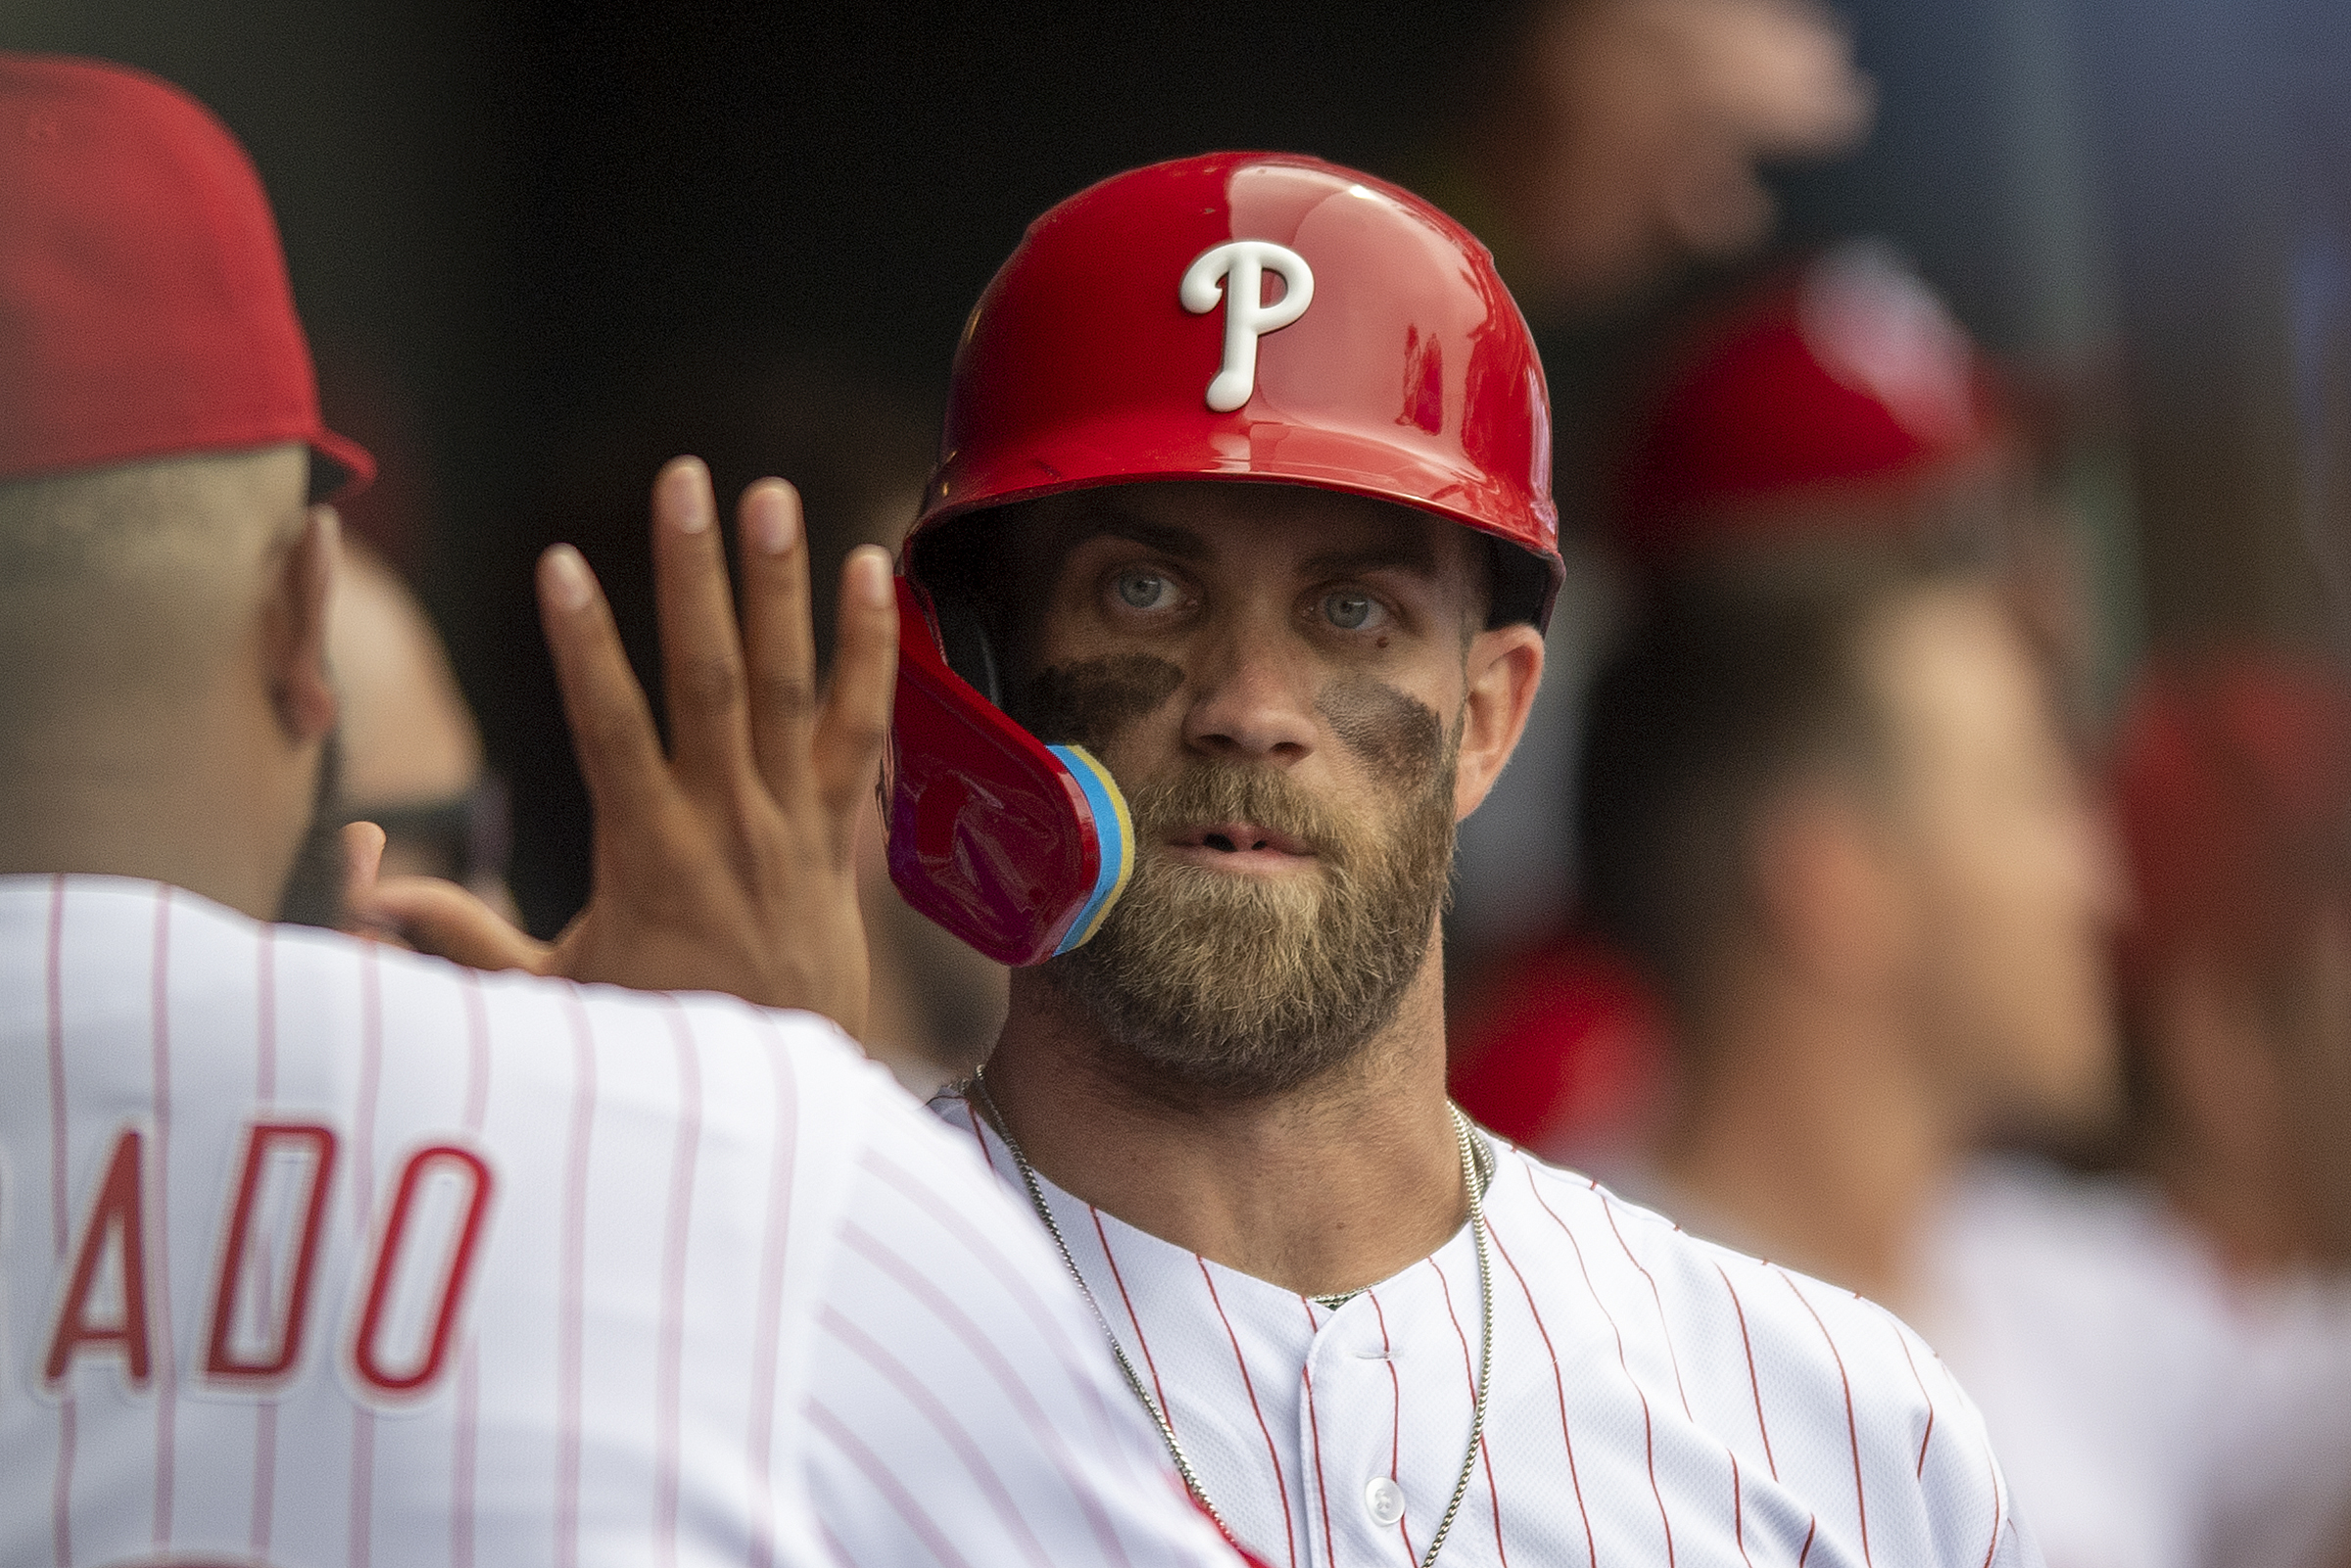 Bryce Harper's elbow injury: Treatment, surgery outlook and can